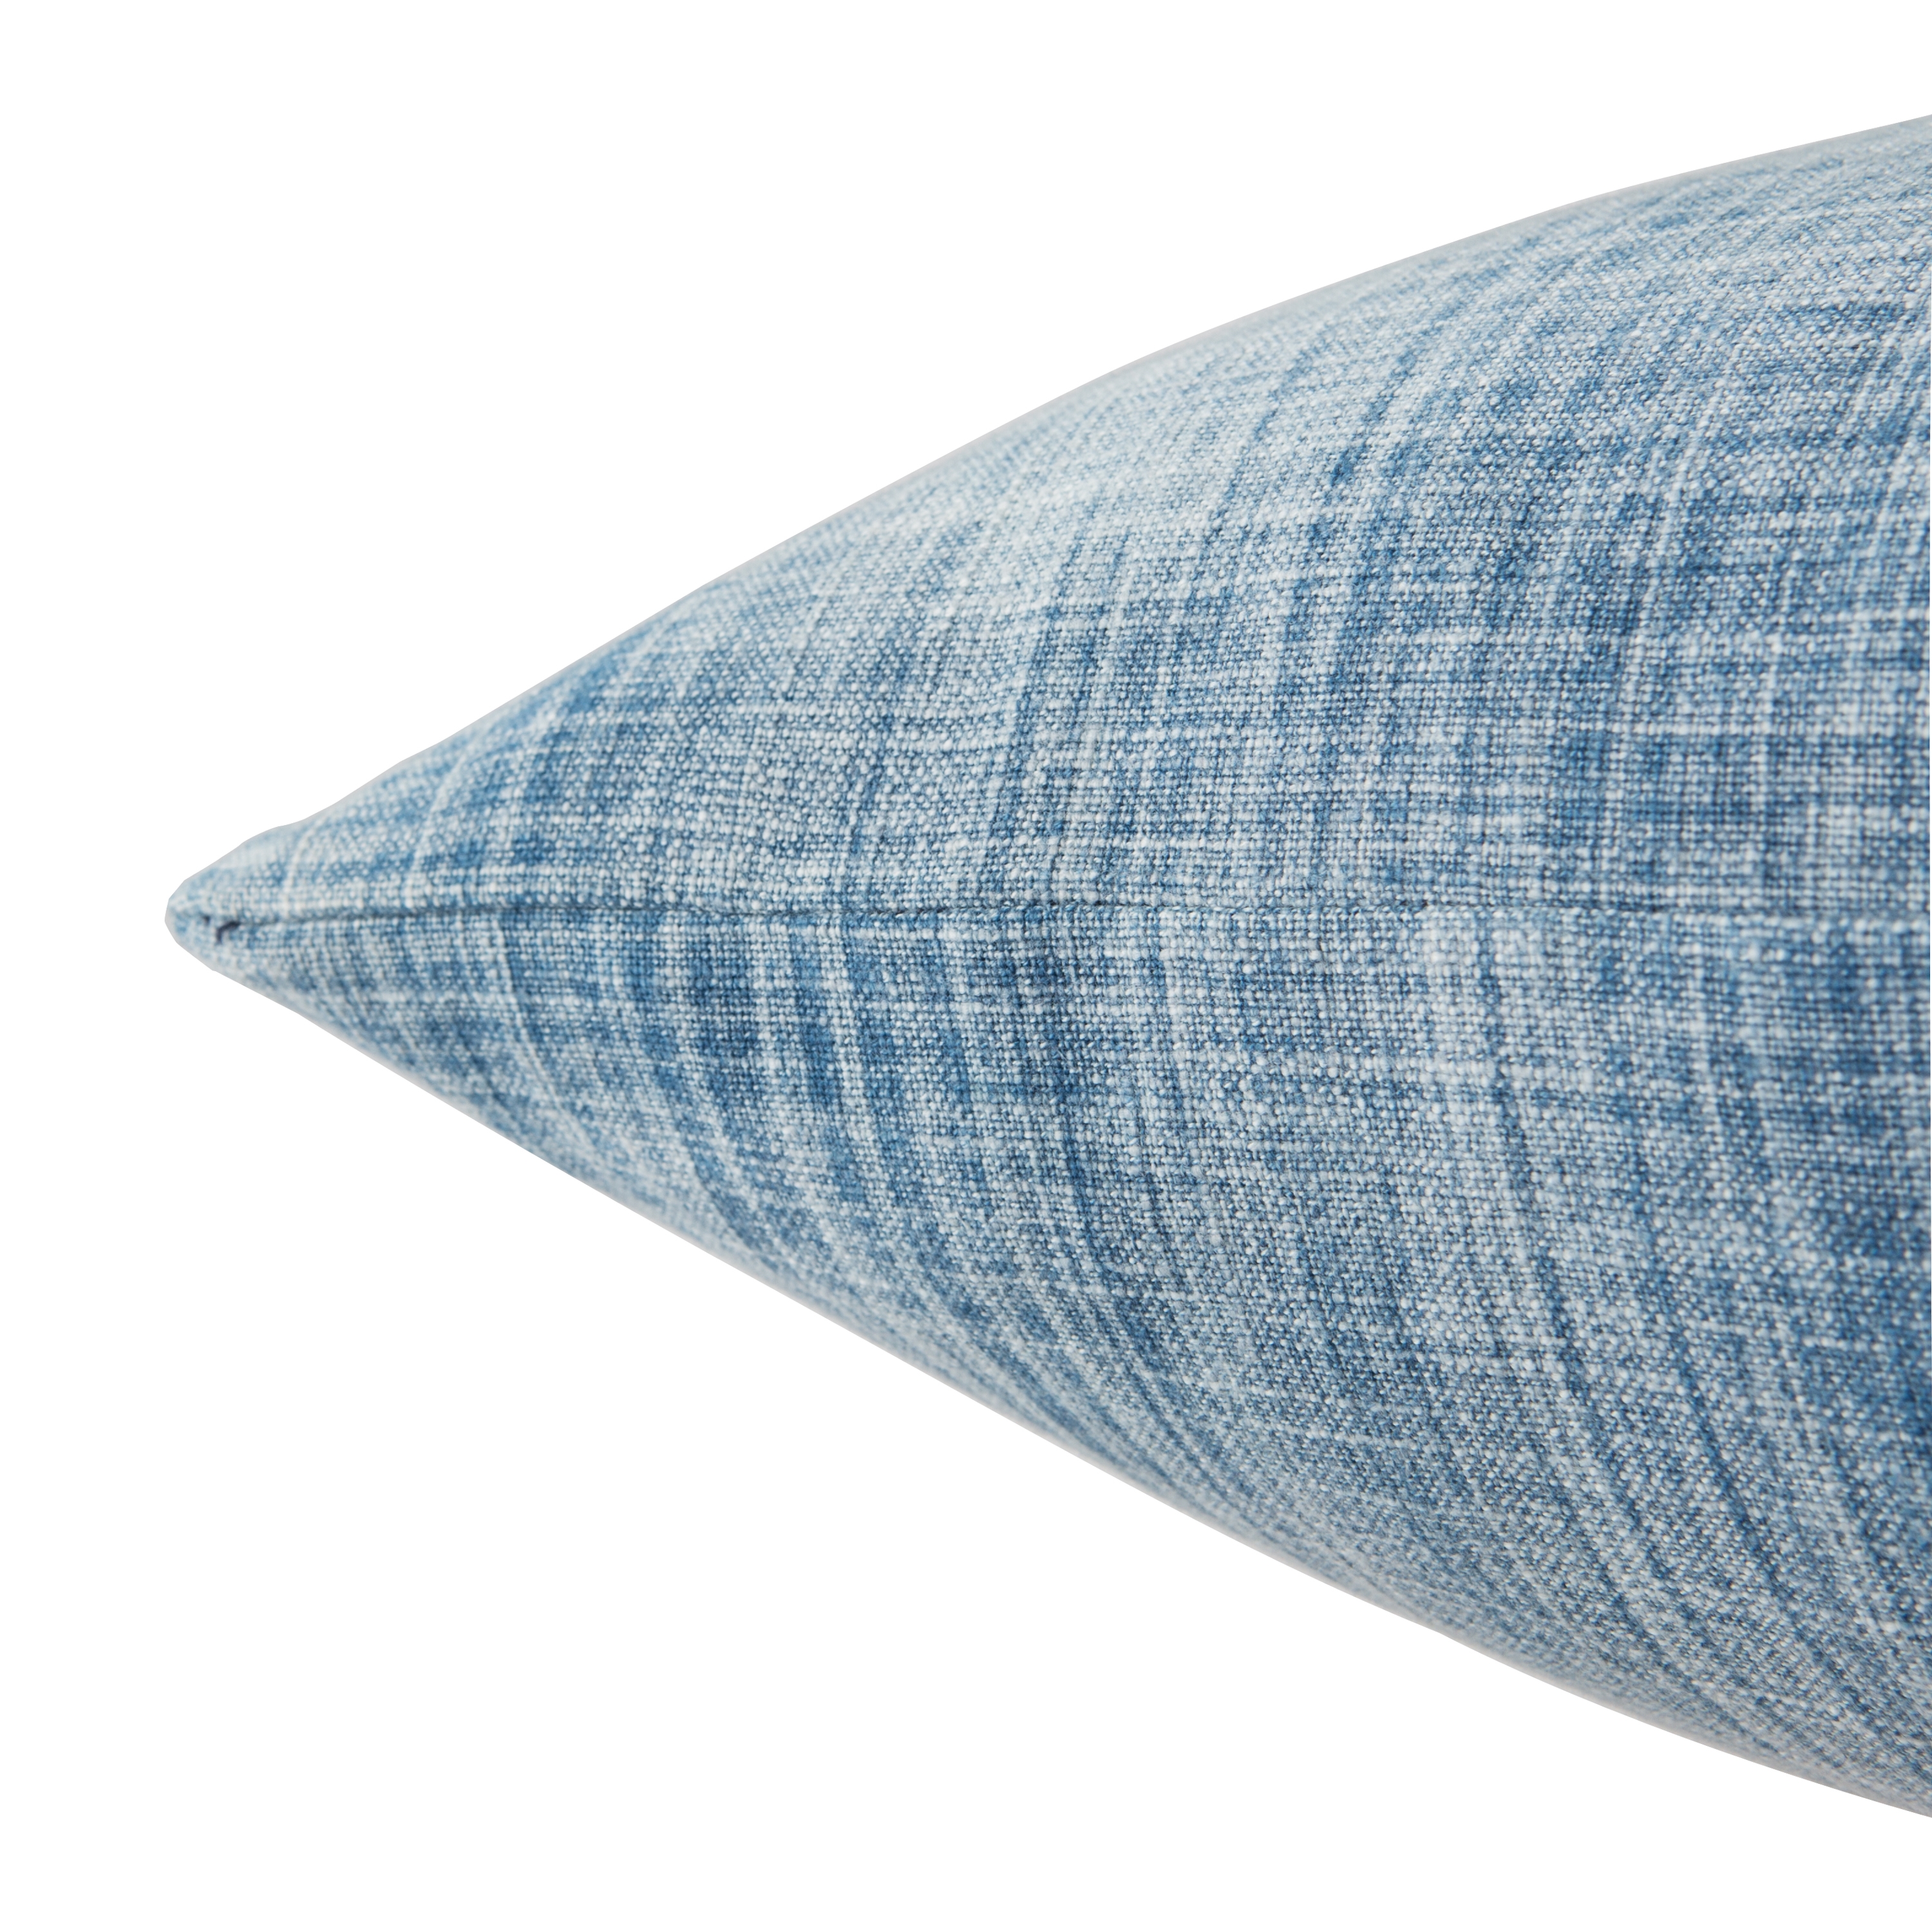 Revolve Pillow with Down Insert, Blue, 22" x 22" - Image 2